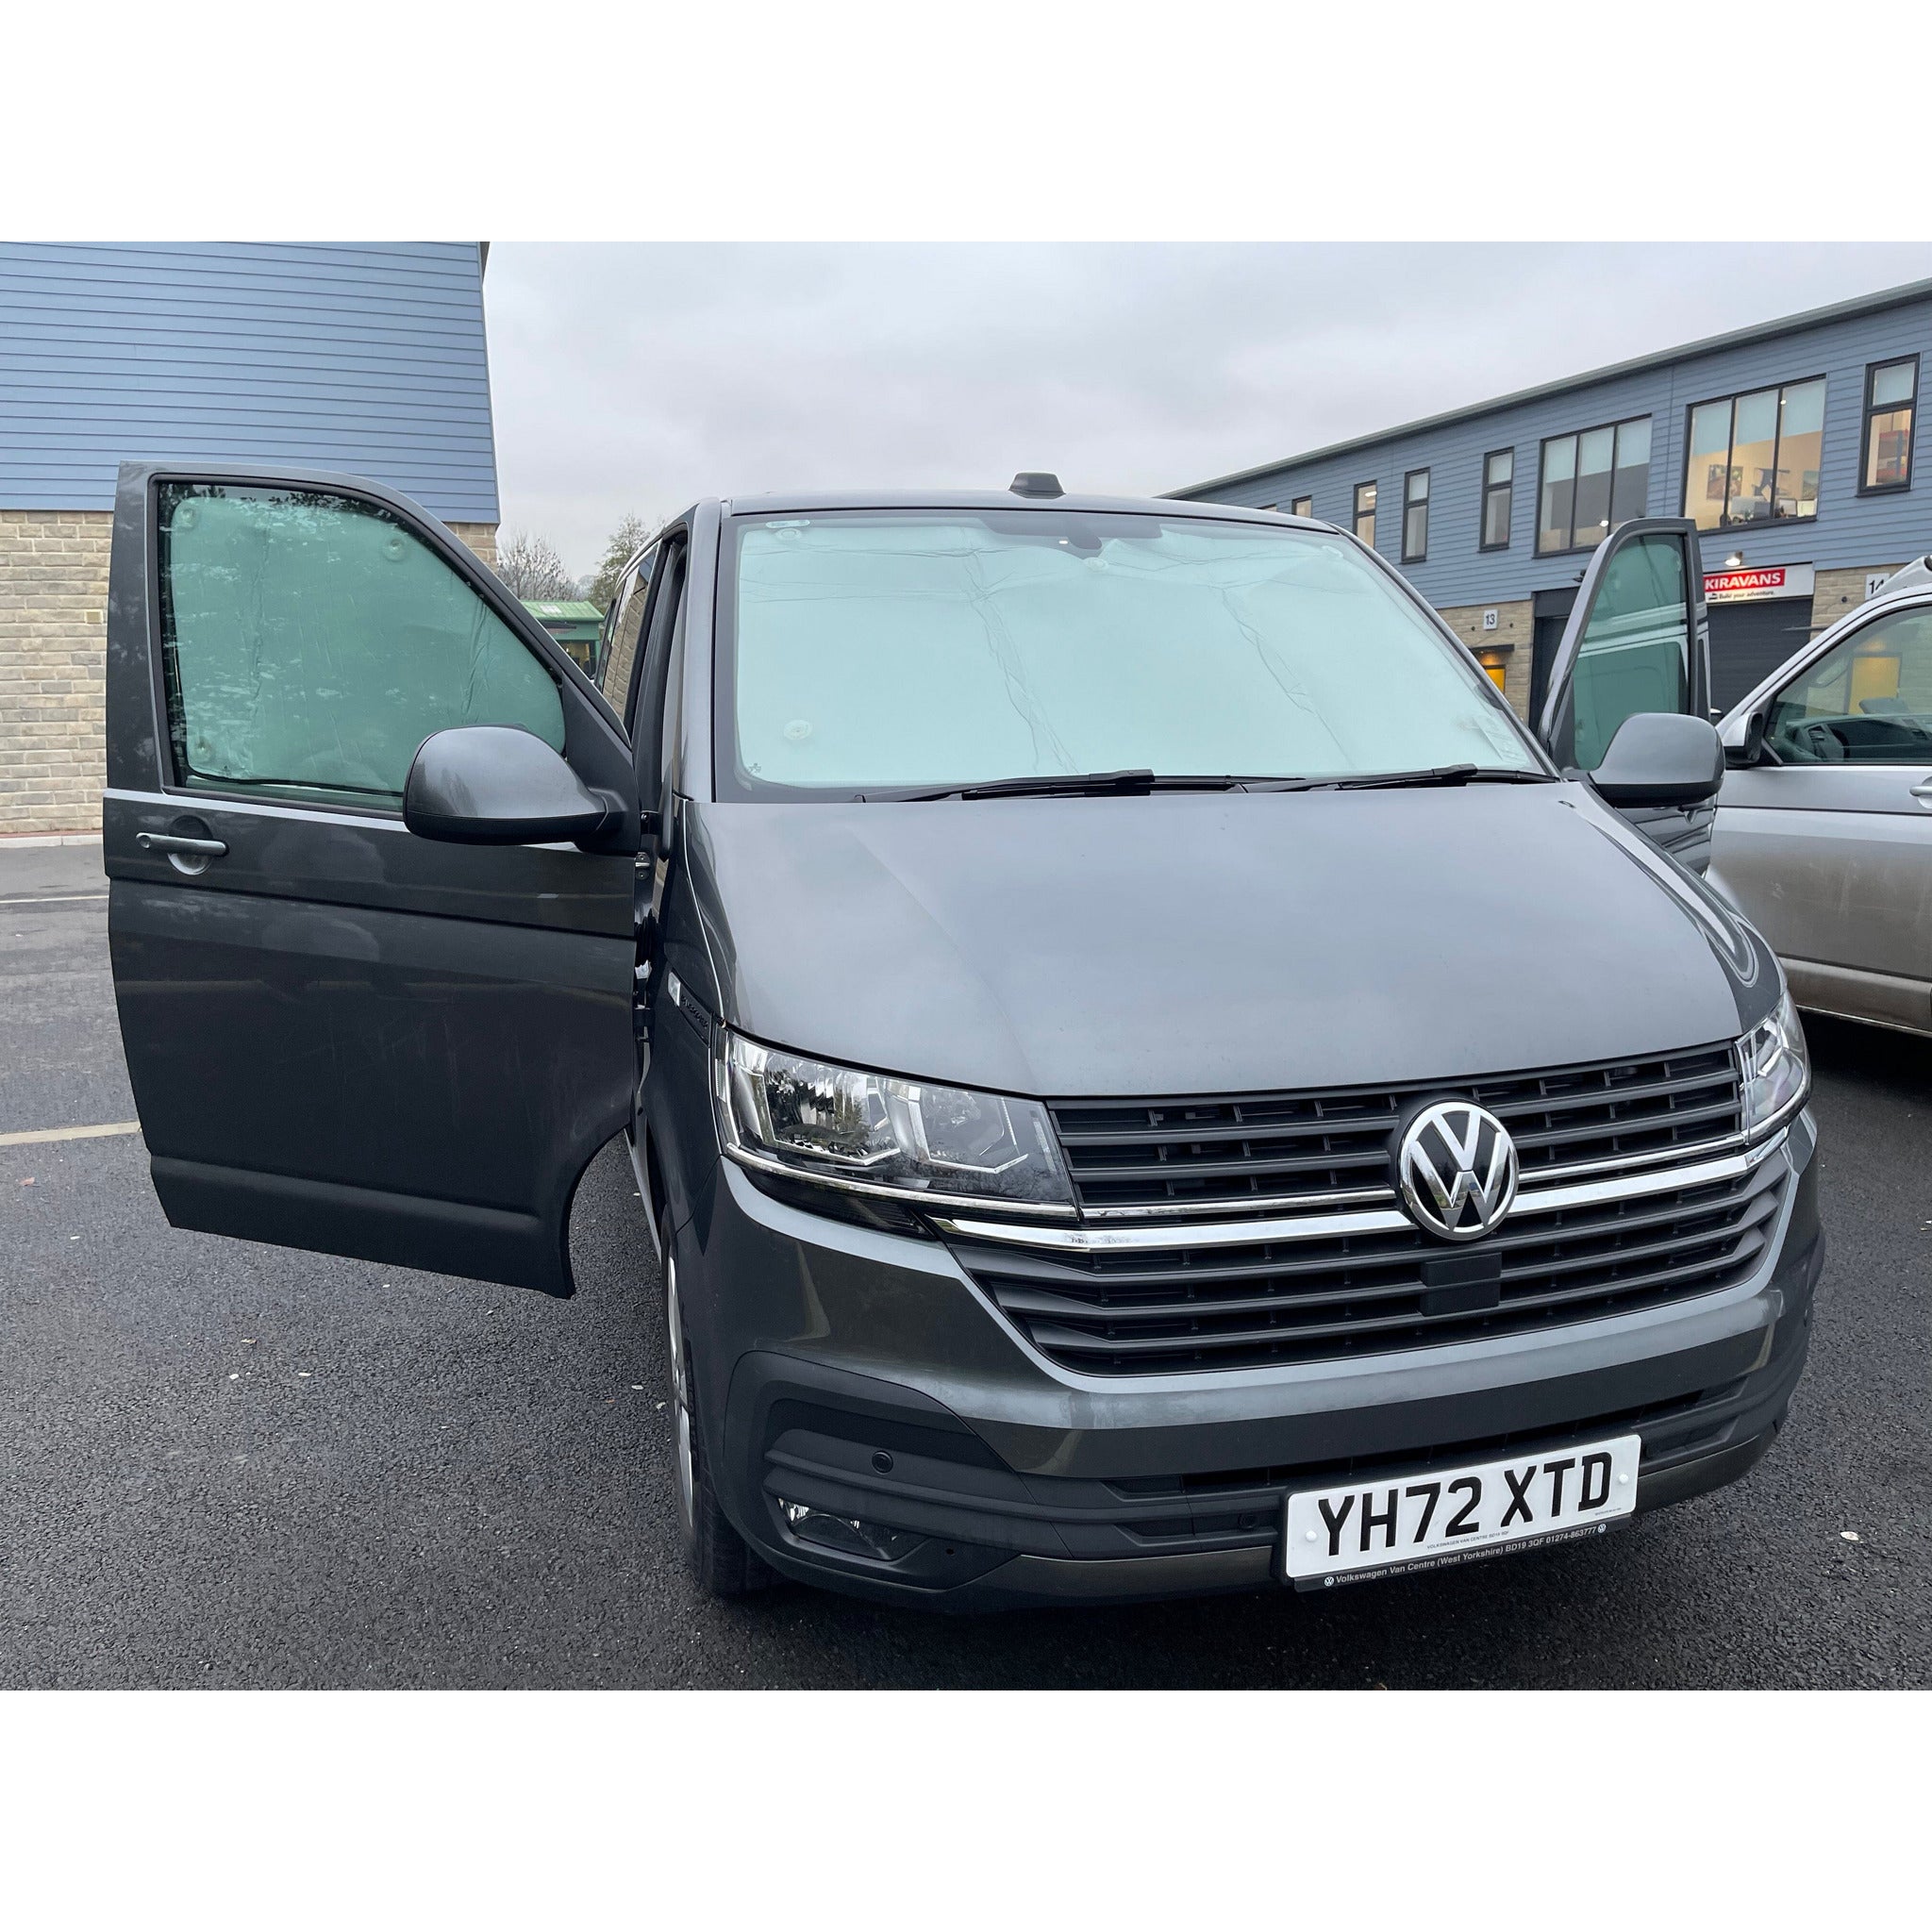 VW T6 Climat NT Thermo Cab Internal Silver Screens Brunner 